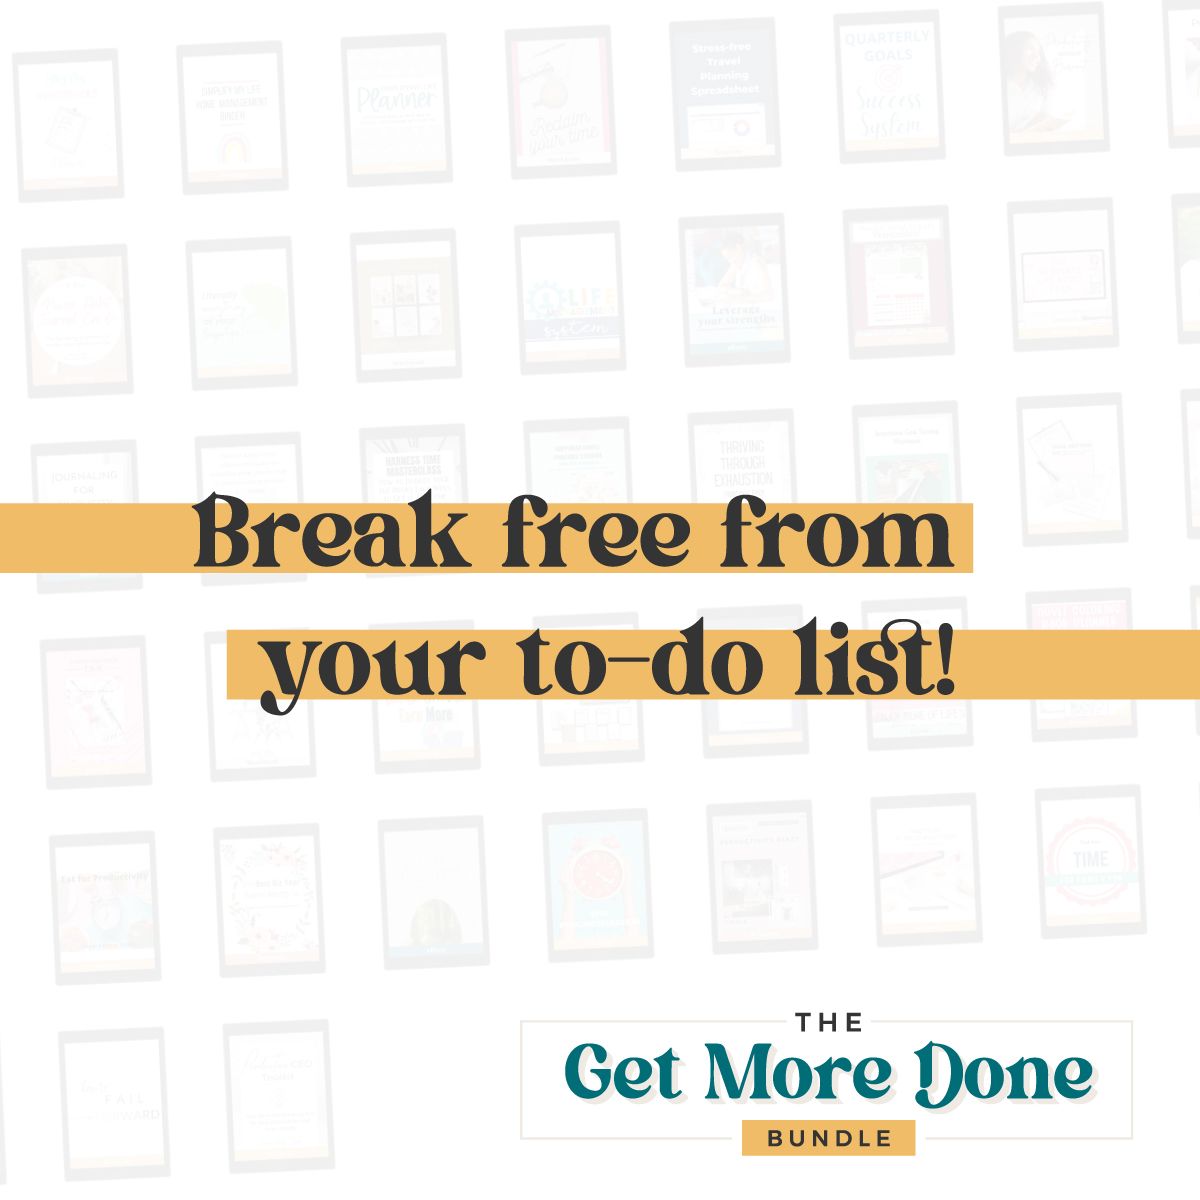 Break free from your to do list with the Get More Done Bundle